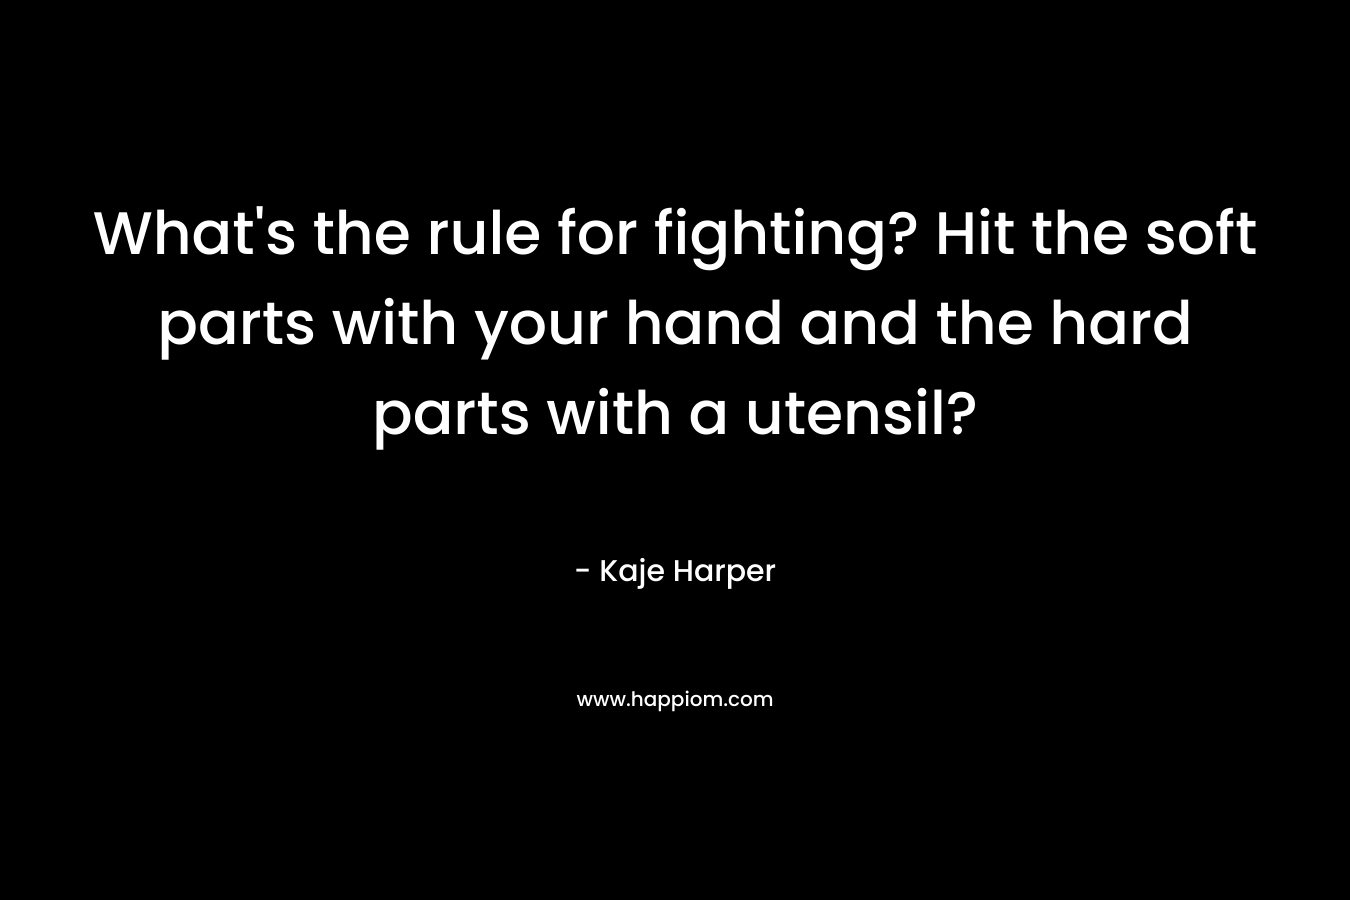 What's the rule for fighting? Hit the soft parts with your hand and the hard parts with a utensil?